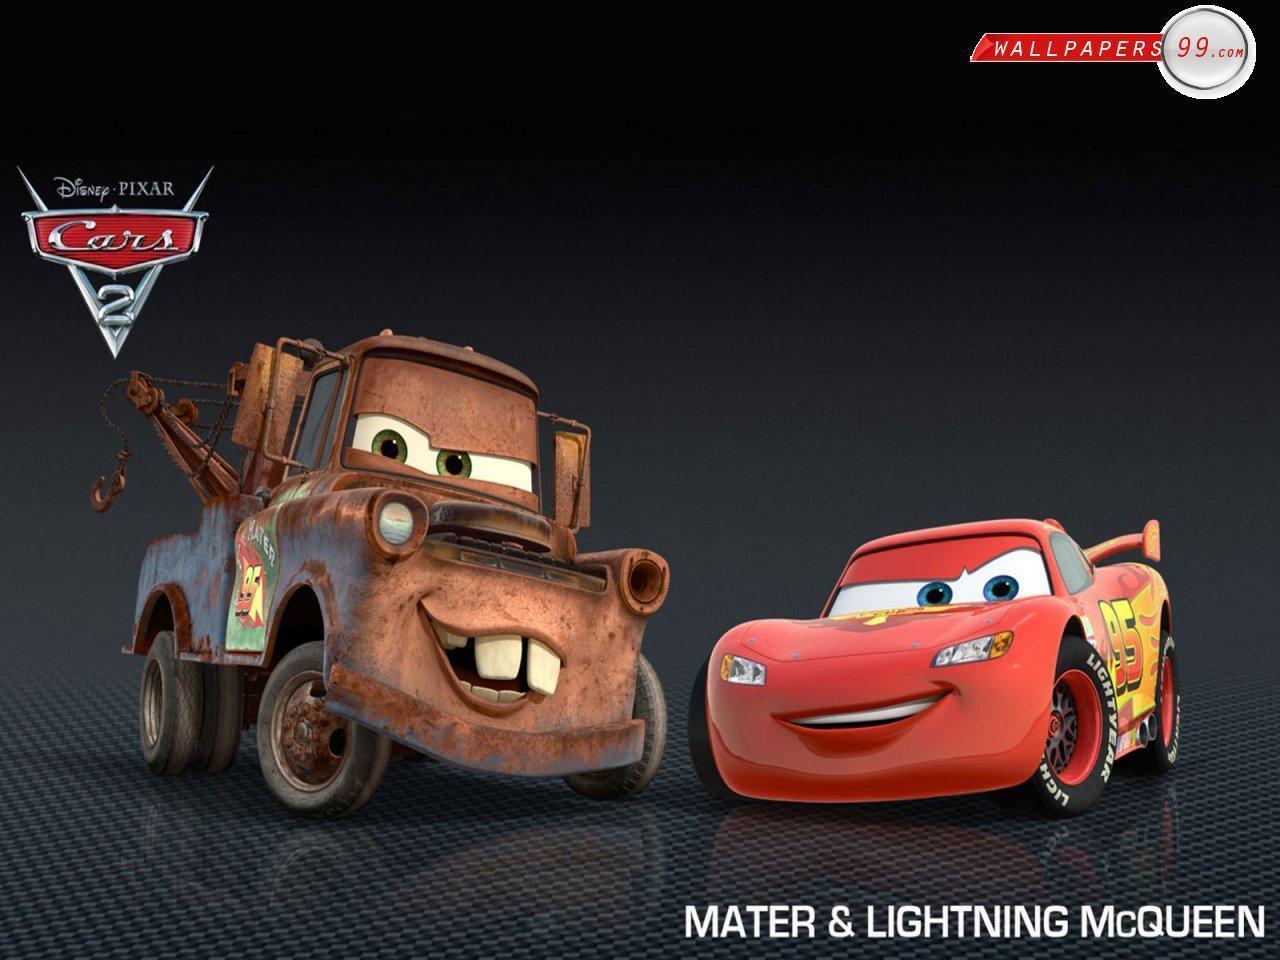 Cars 2 Cartoon Animated Movie Wallpaper HD For Mobile. Cartoons